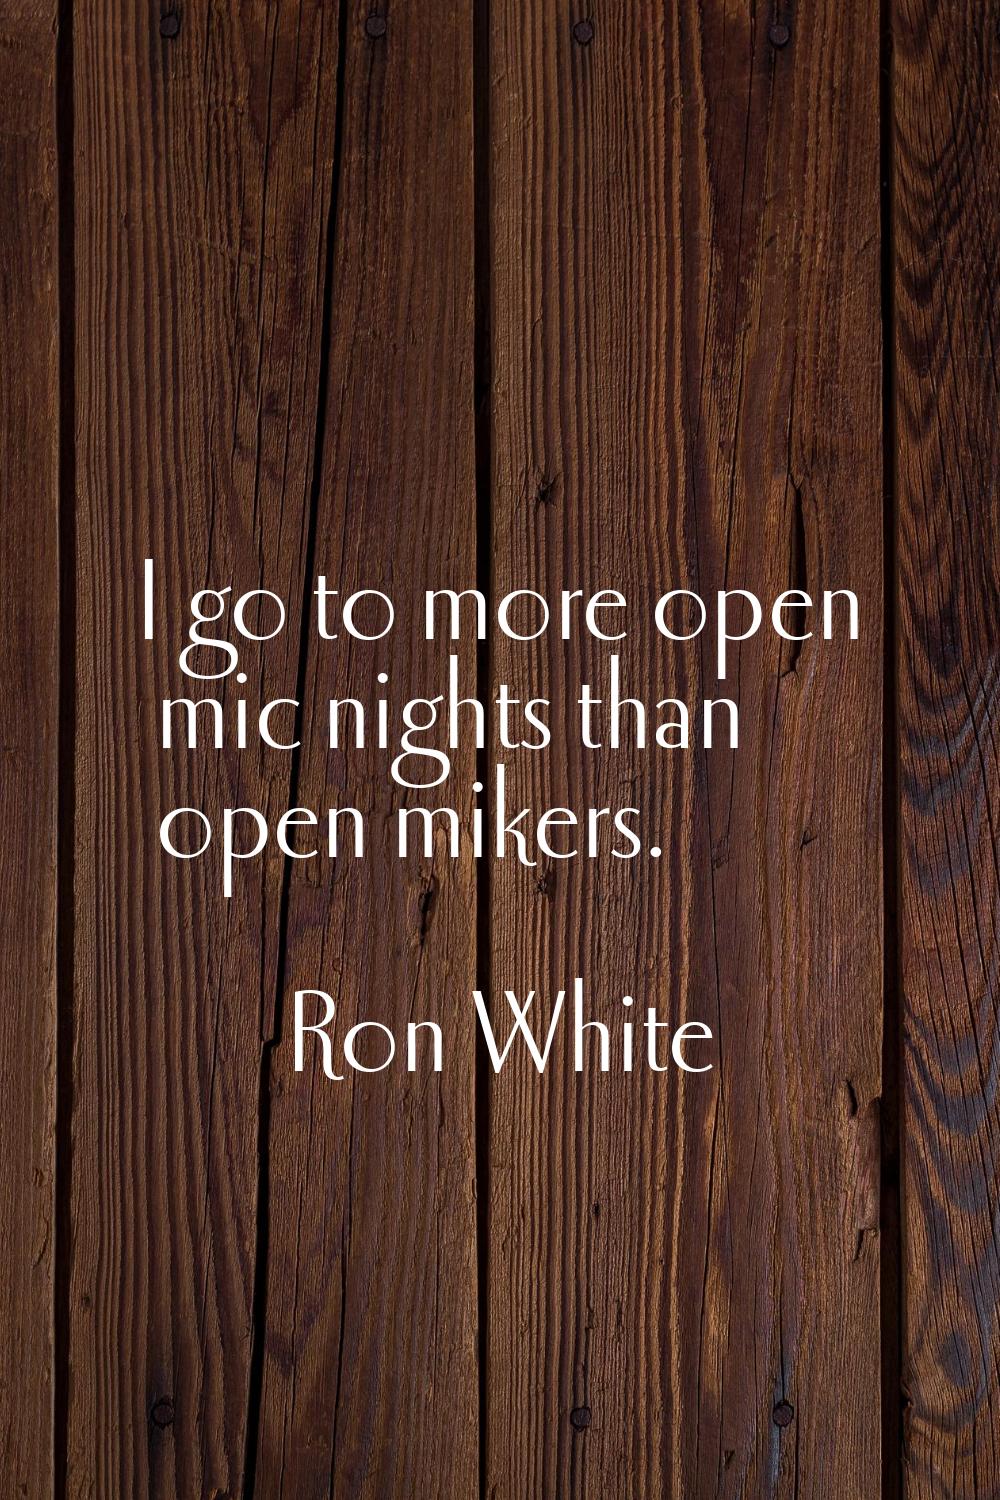 I go to more open mic nights than open mikers.